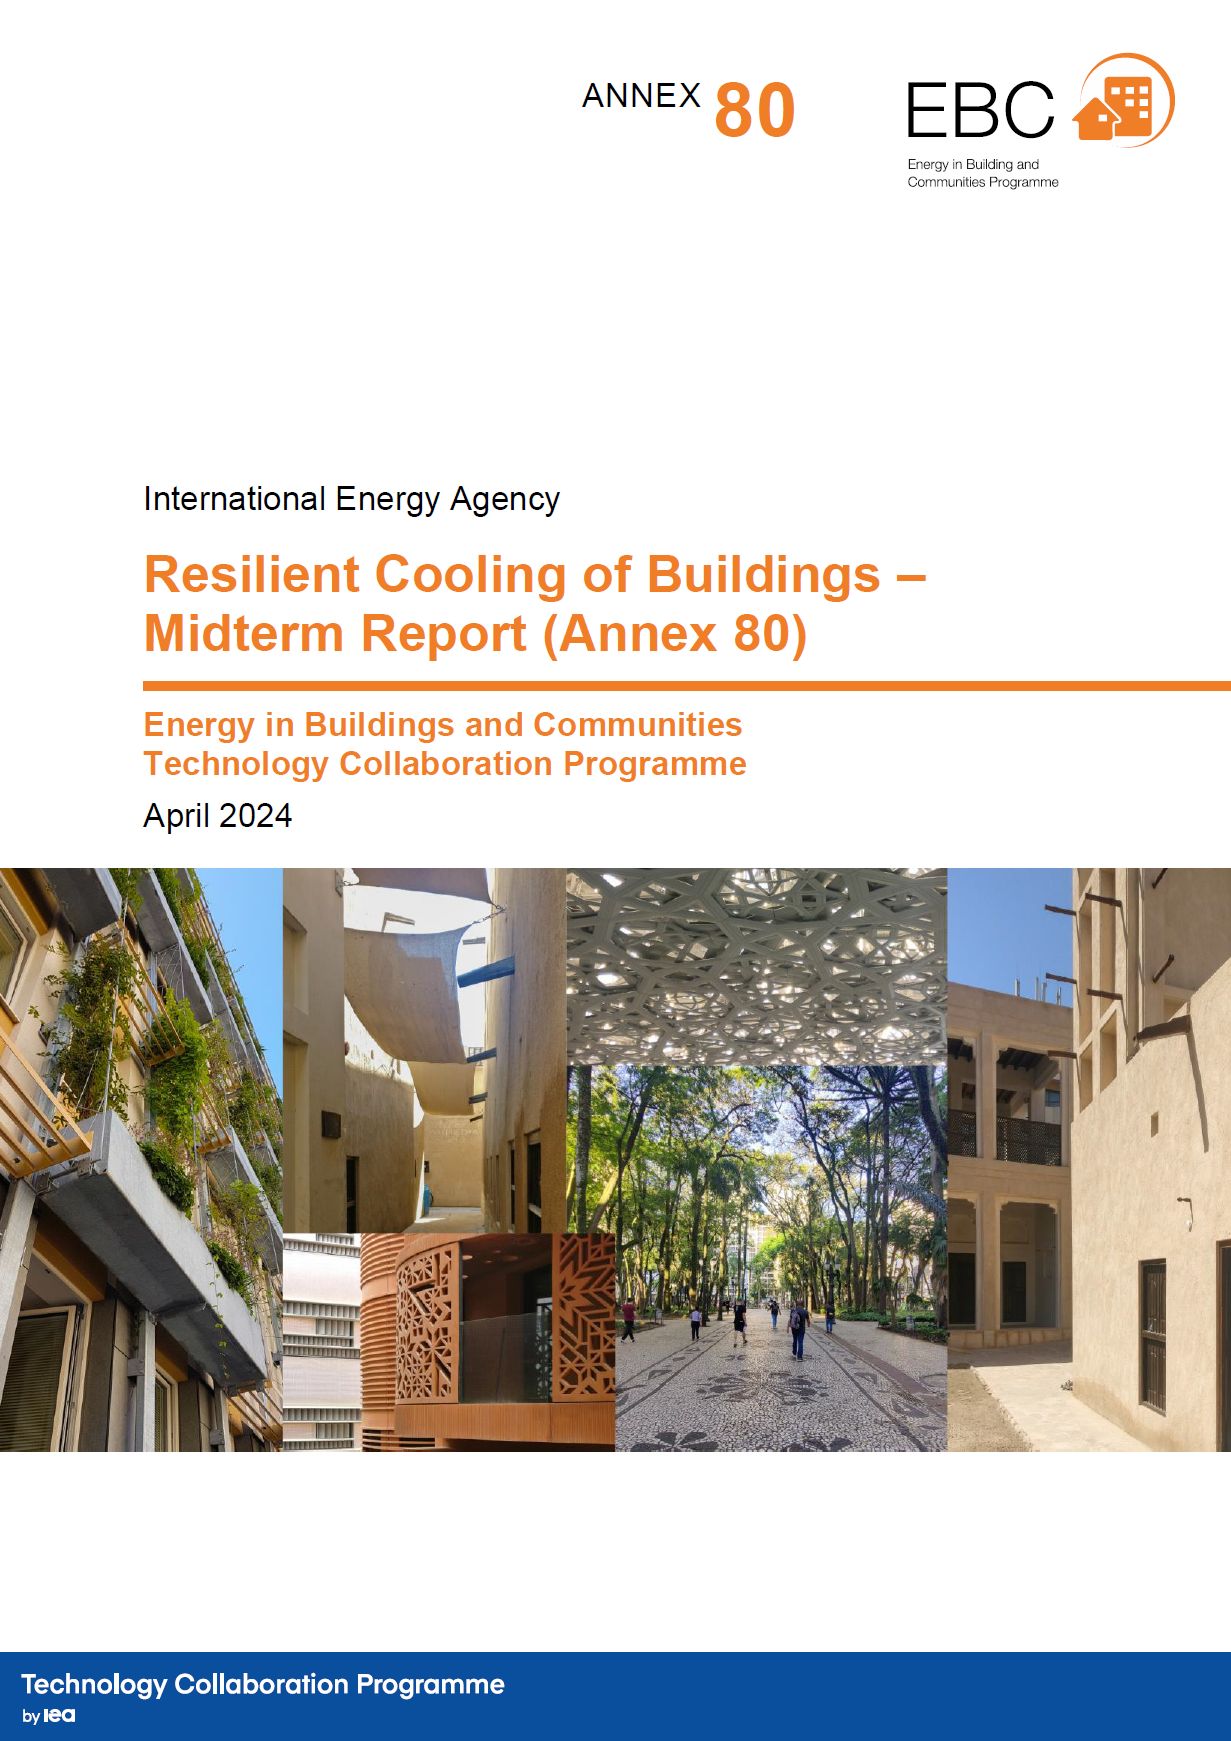 International Energy Agency Resilient Cooling of Buildings – Midterm Report (Annex 80)